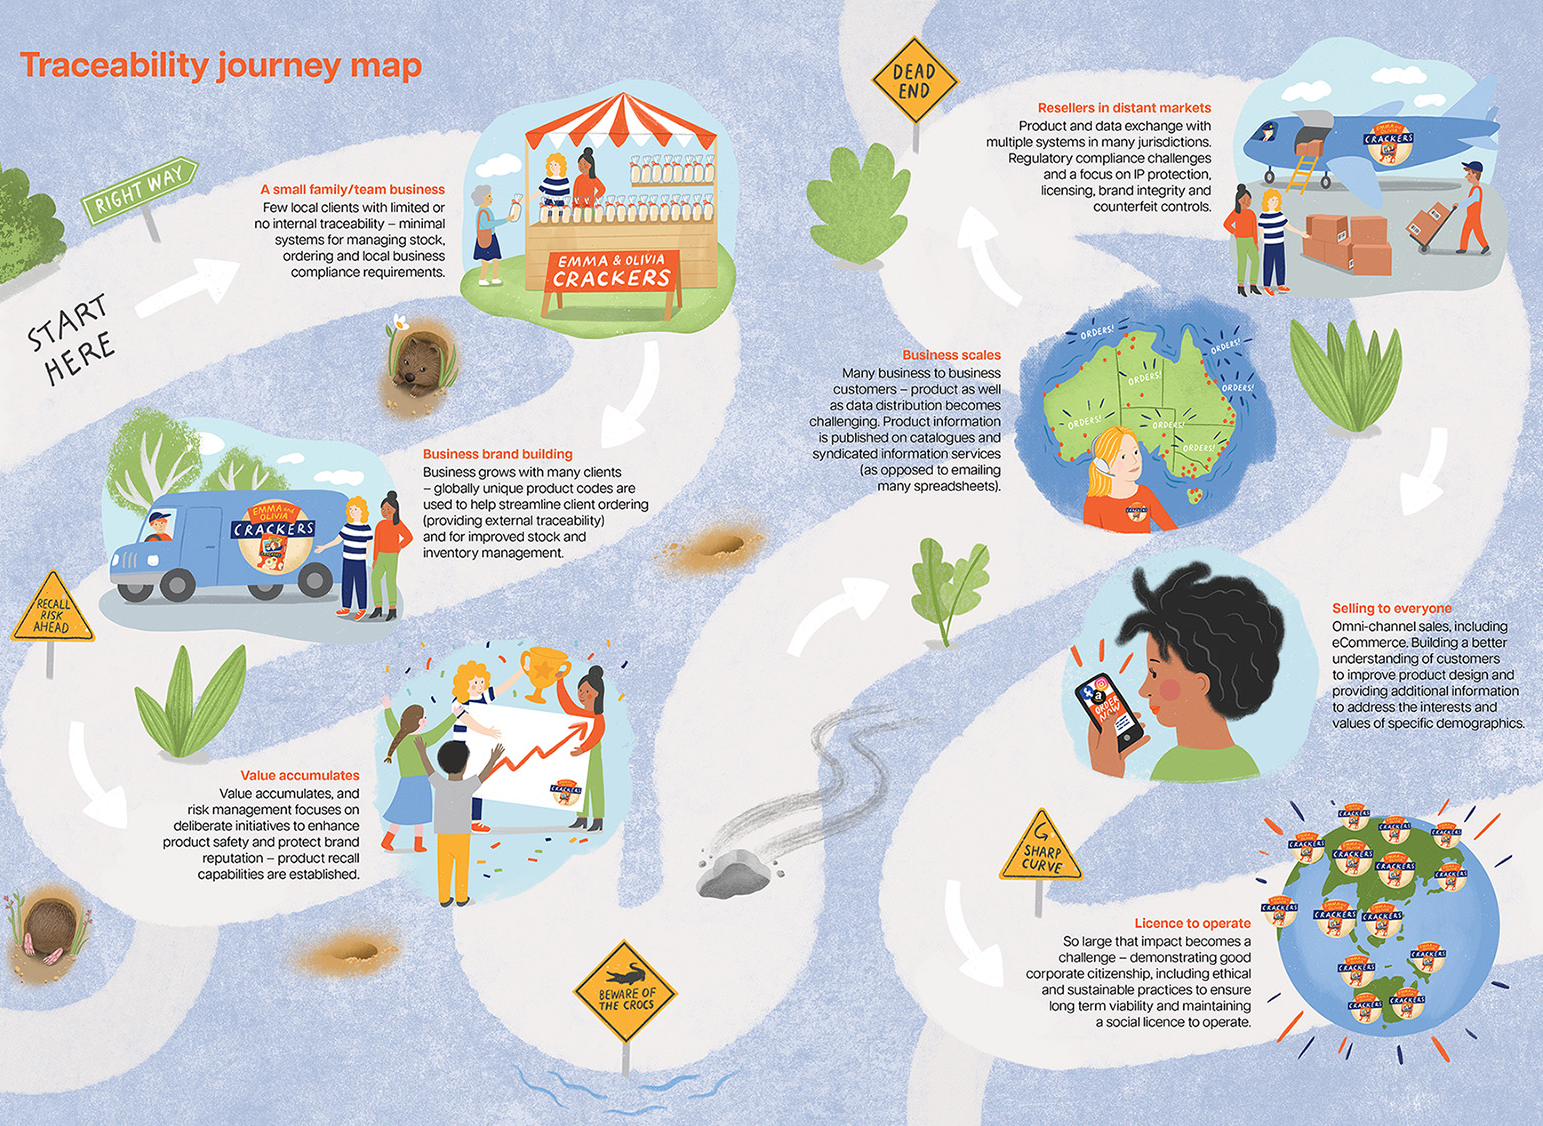 Traceability Learning Journeys, a GS1 report commissioned by CRC partner WA DPIRD, is based on conversations with 20+ WA food and beverage firms about the benefits accrued and lessons learned from improving their traceability systems.